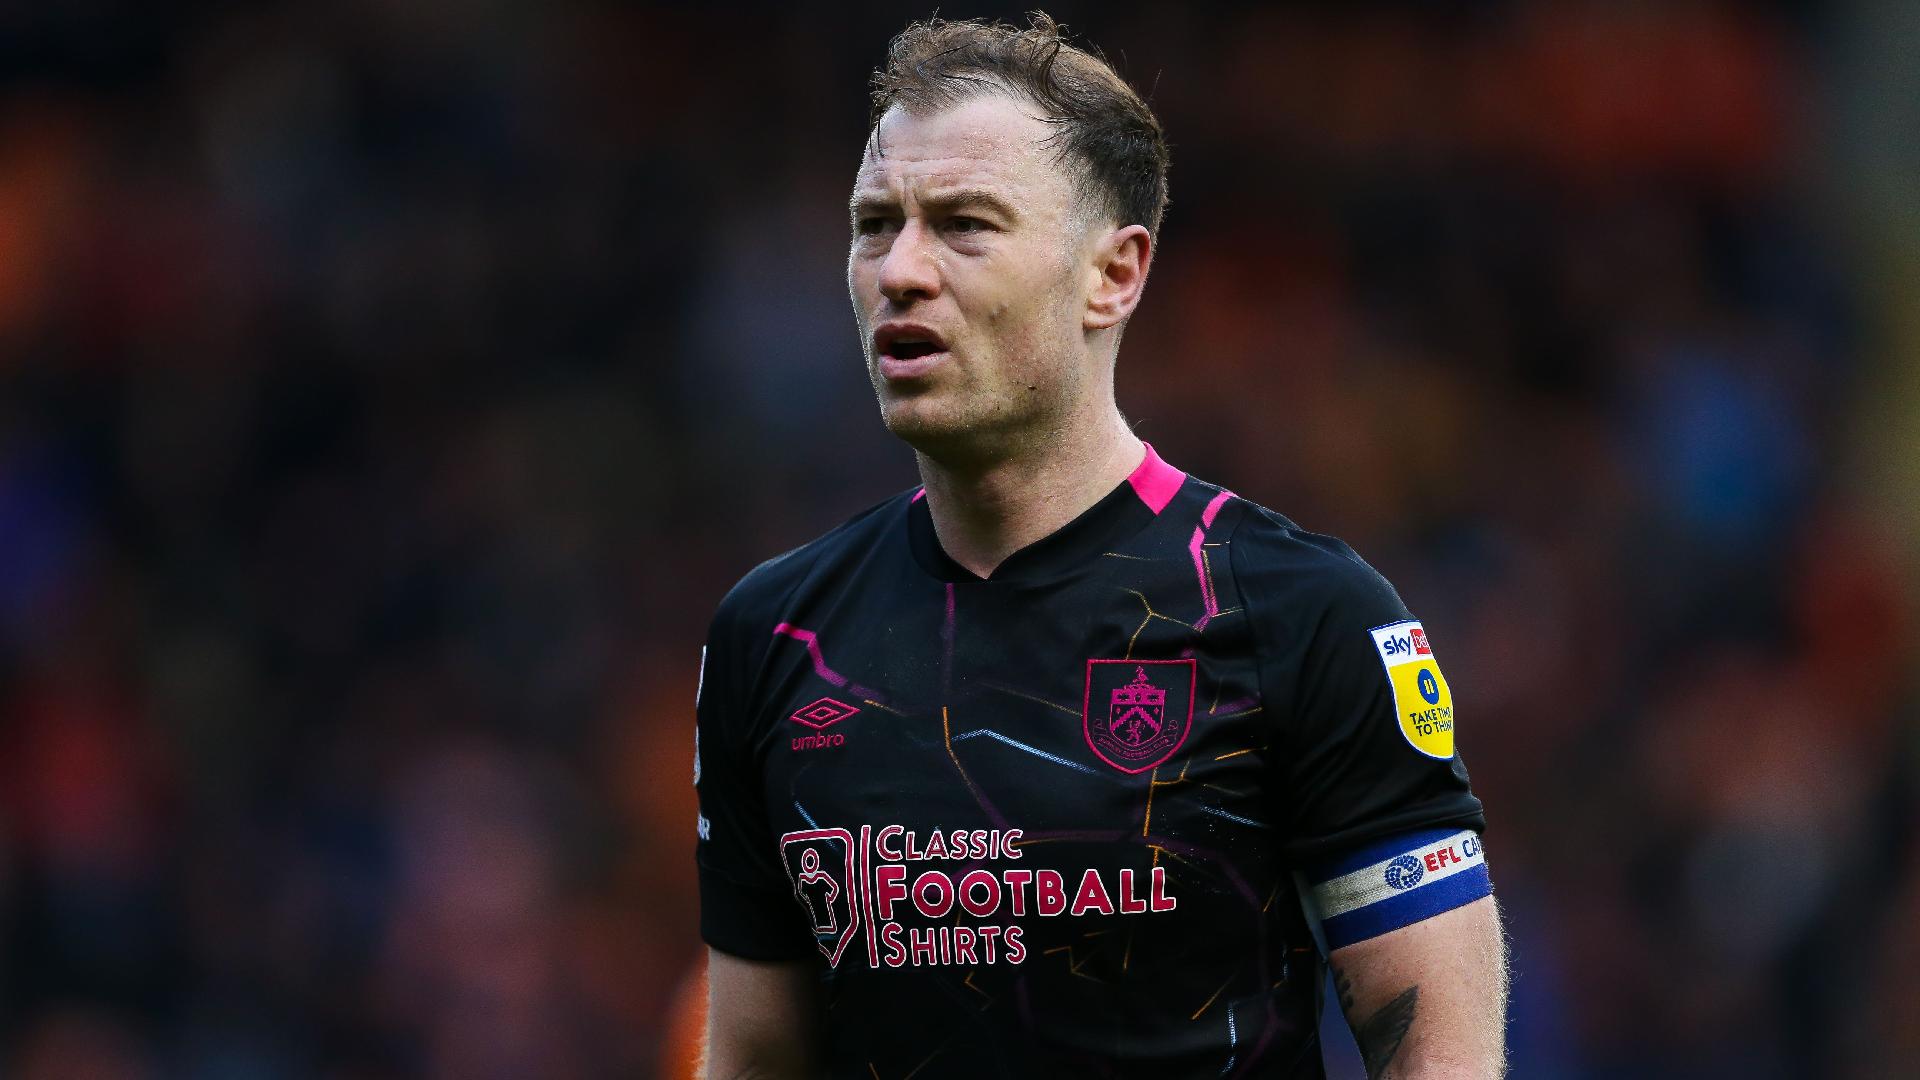 Ashley Barnes to join Norwich after Burnley exit